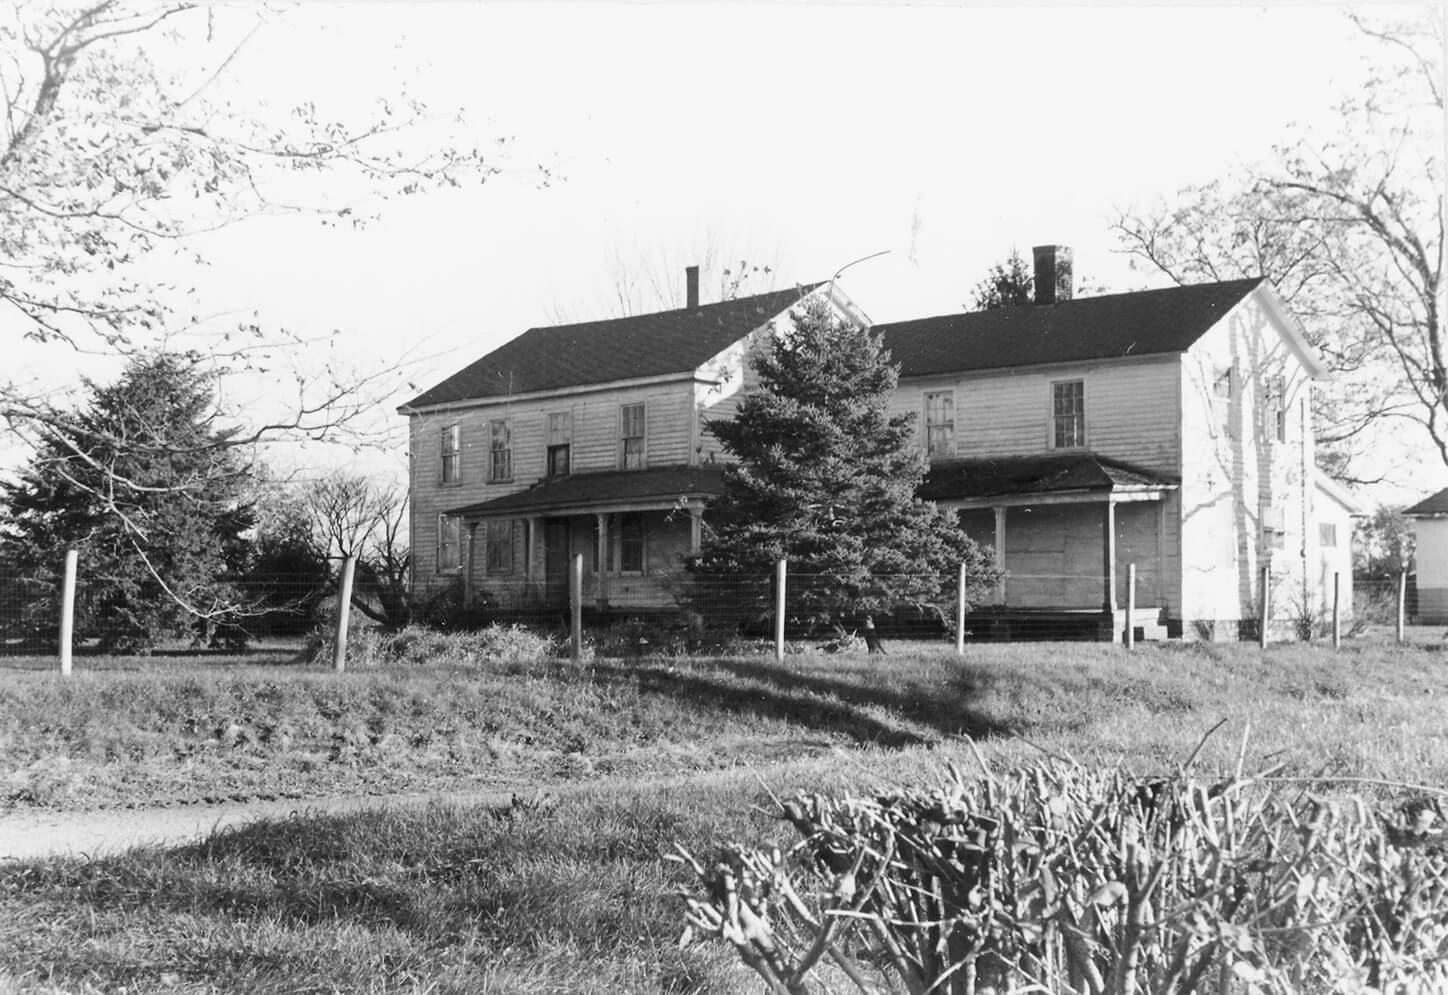 Black and white photo of a large white dilapidated farmhouse, surrounded by trees and a wire fence.